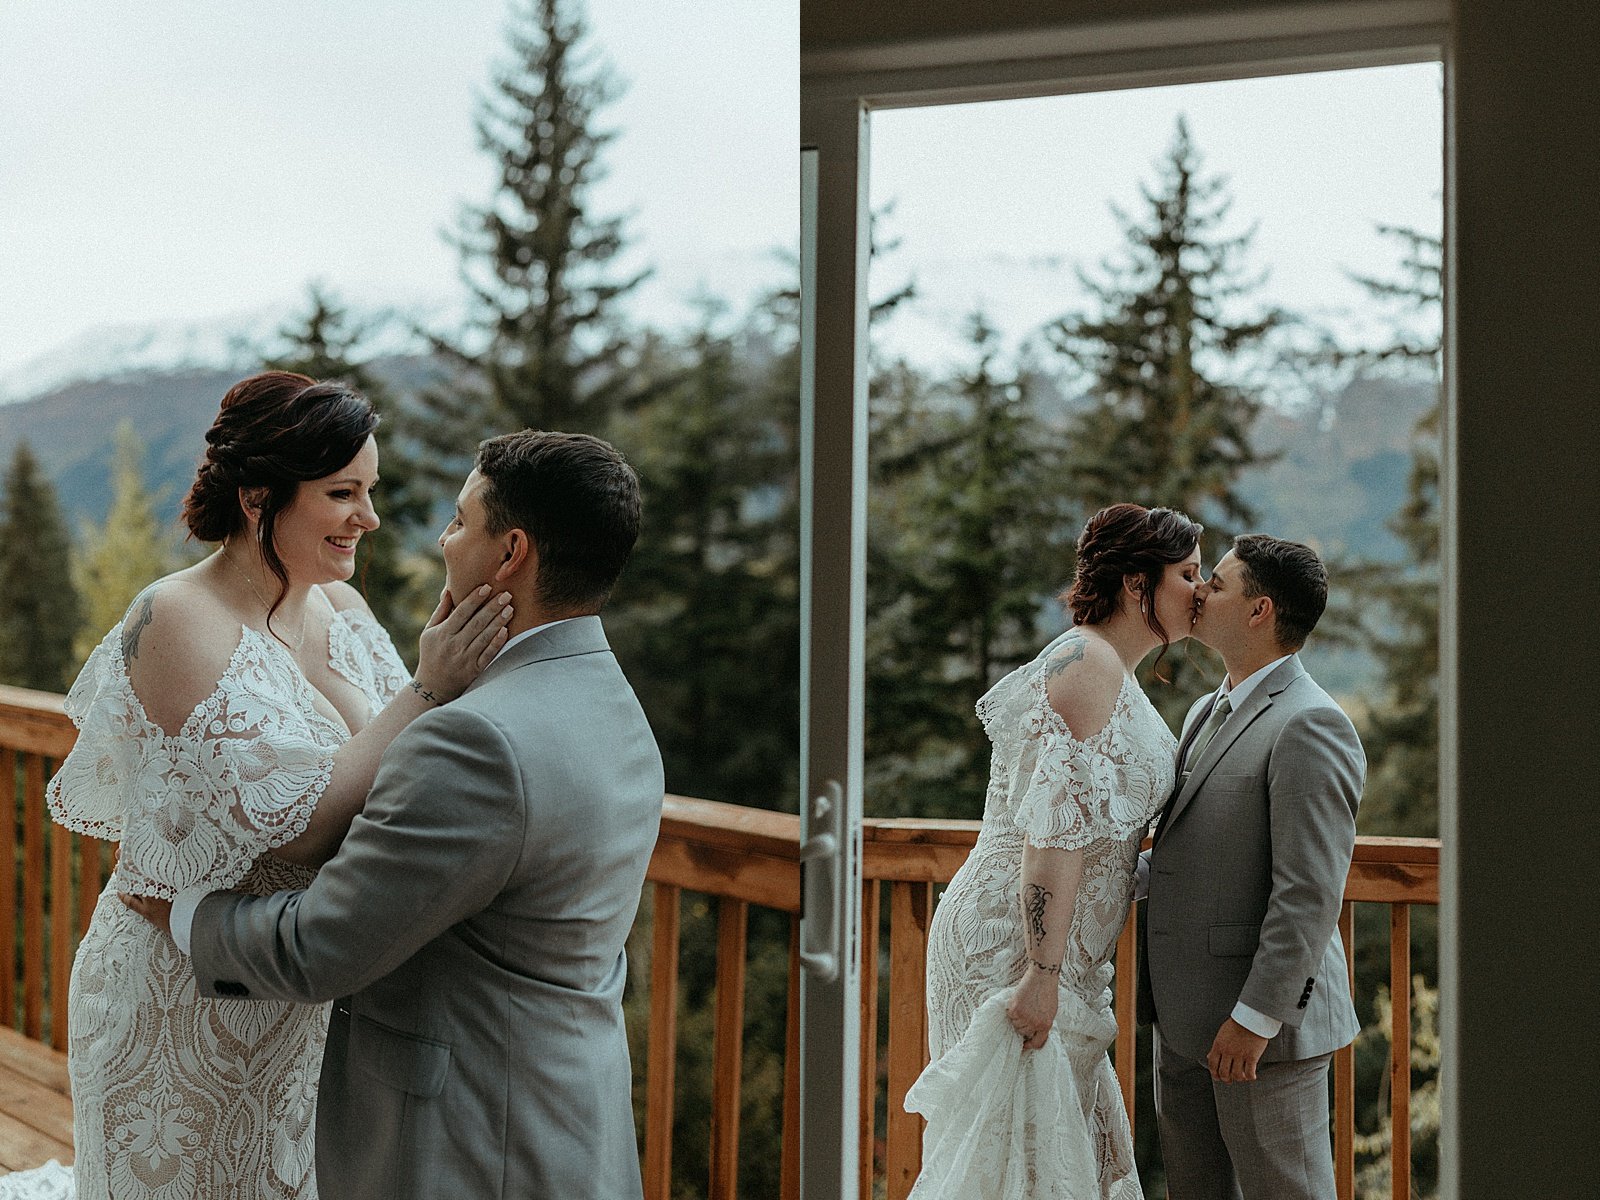  Bride and groom embracing on a balcony in the woods after their first look  